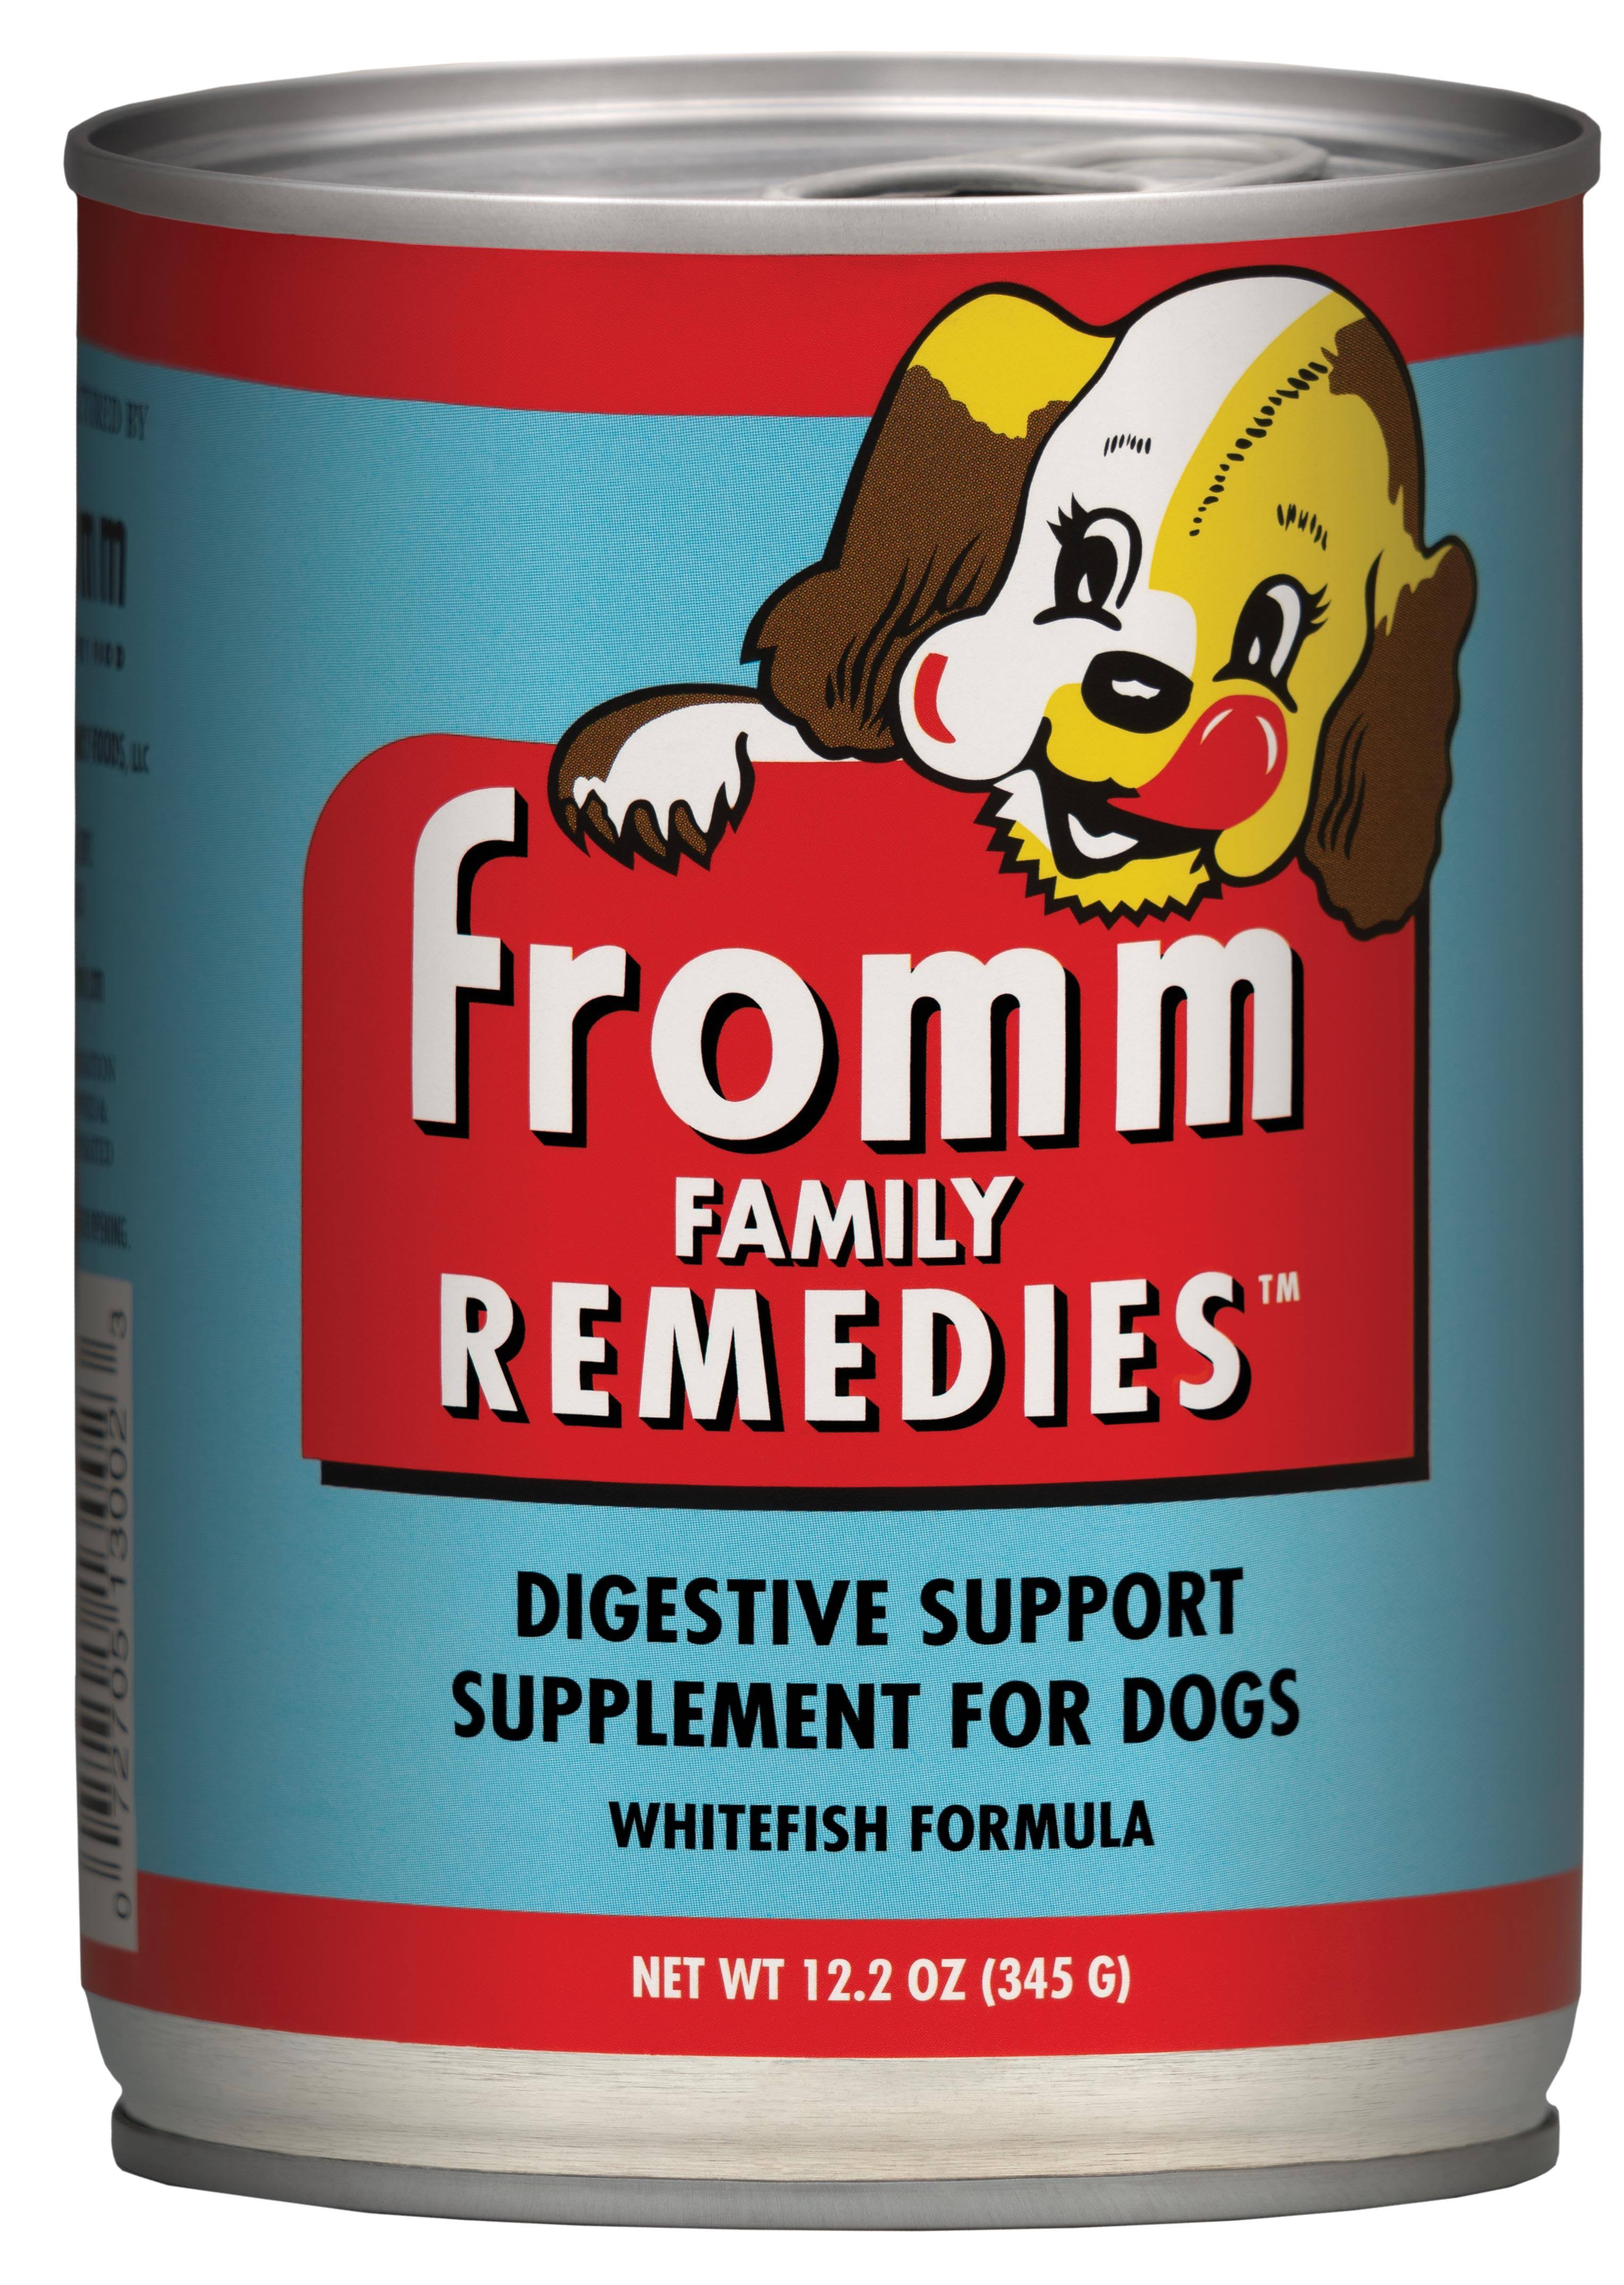 Fromm Family Remedies Digestive Support Whitefish Formula Dog Supplement, 12.2-oz